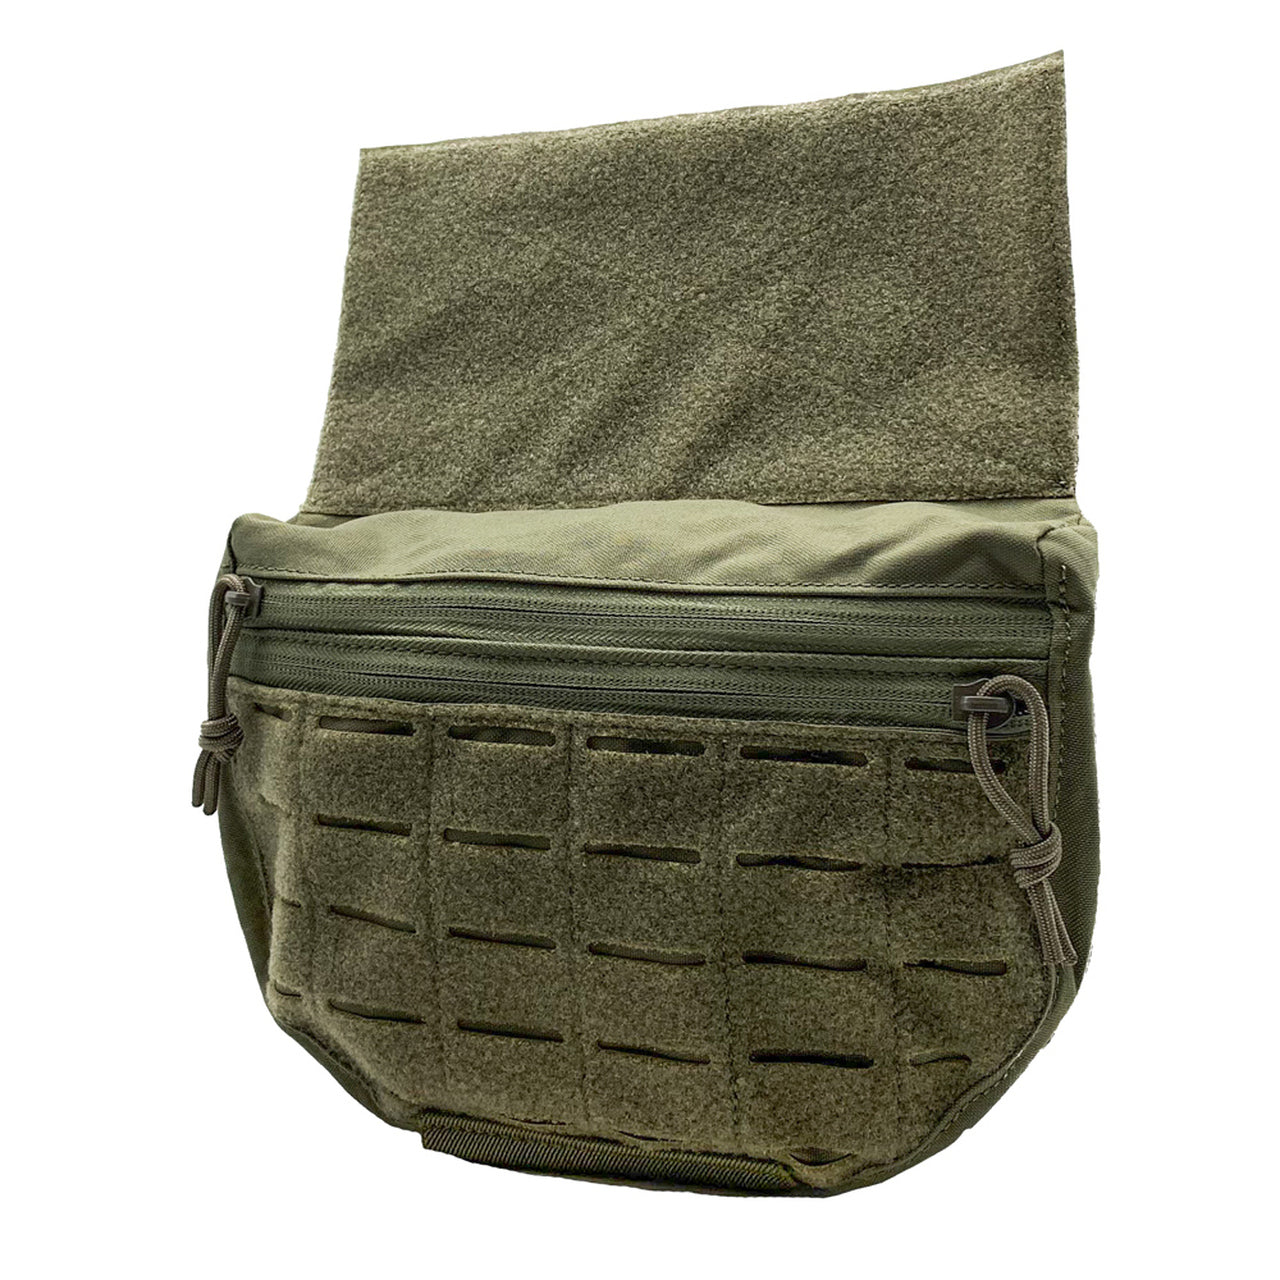 A Shellback Tactical Flap Sac 2.0 with a zipper on it.